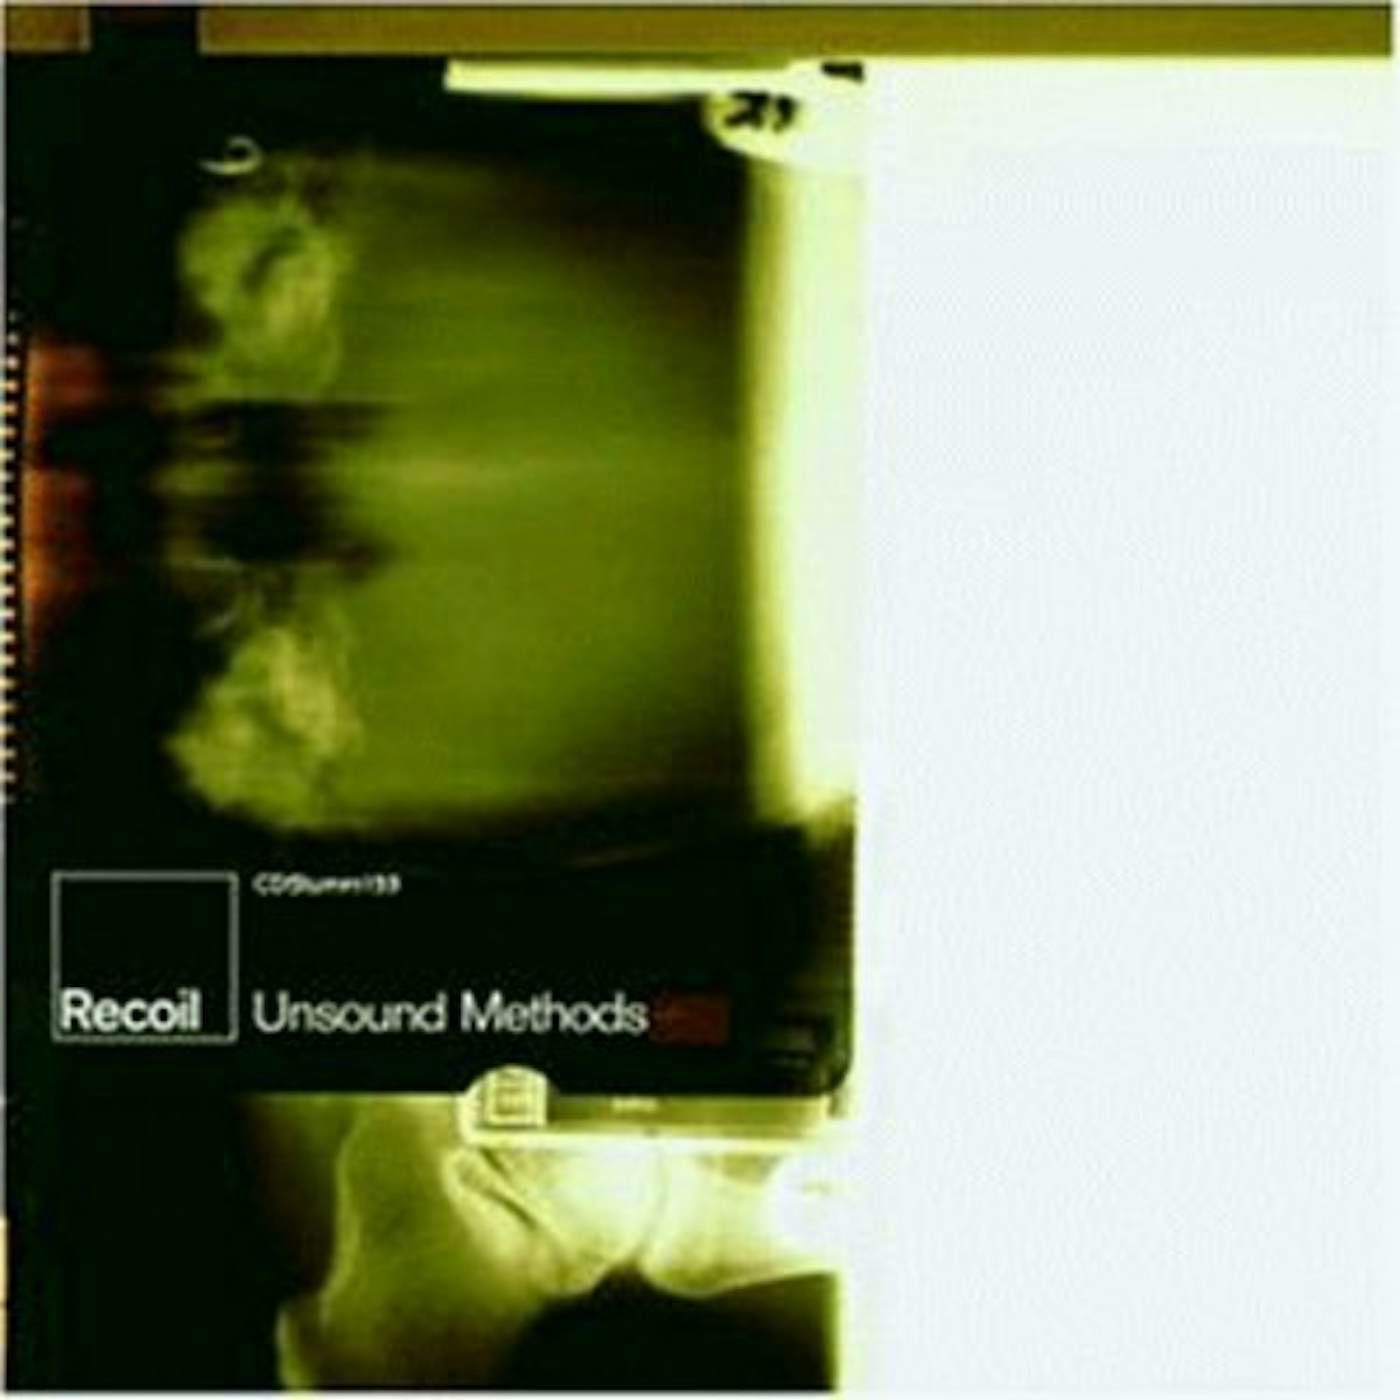 Recoil UNSOUND METHODS CD